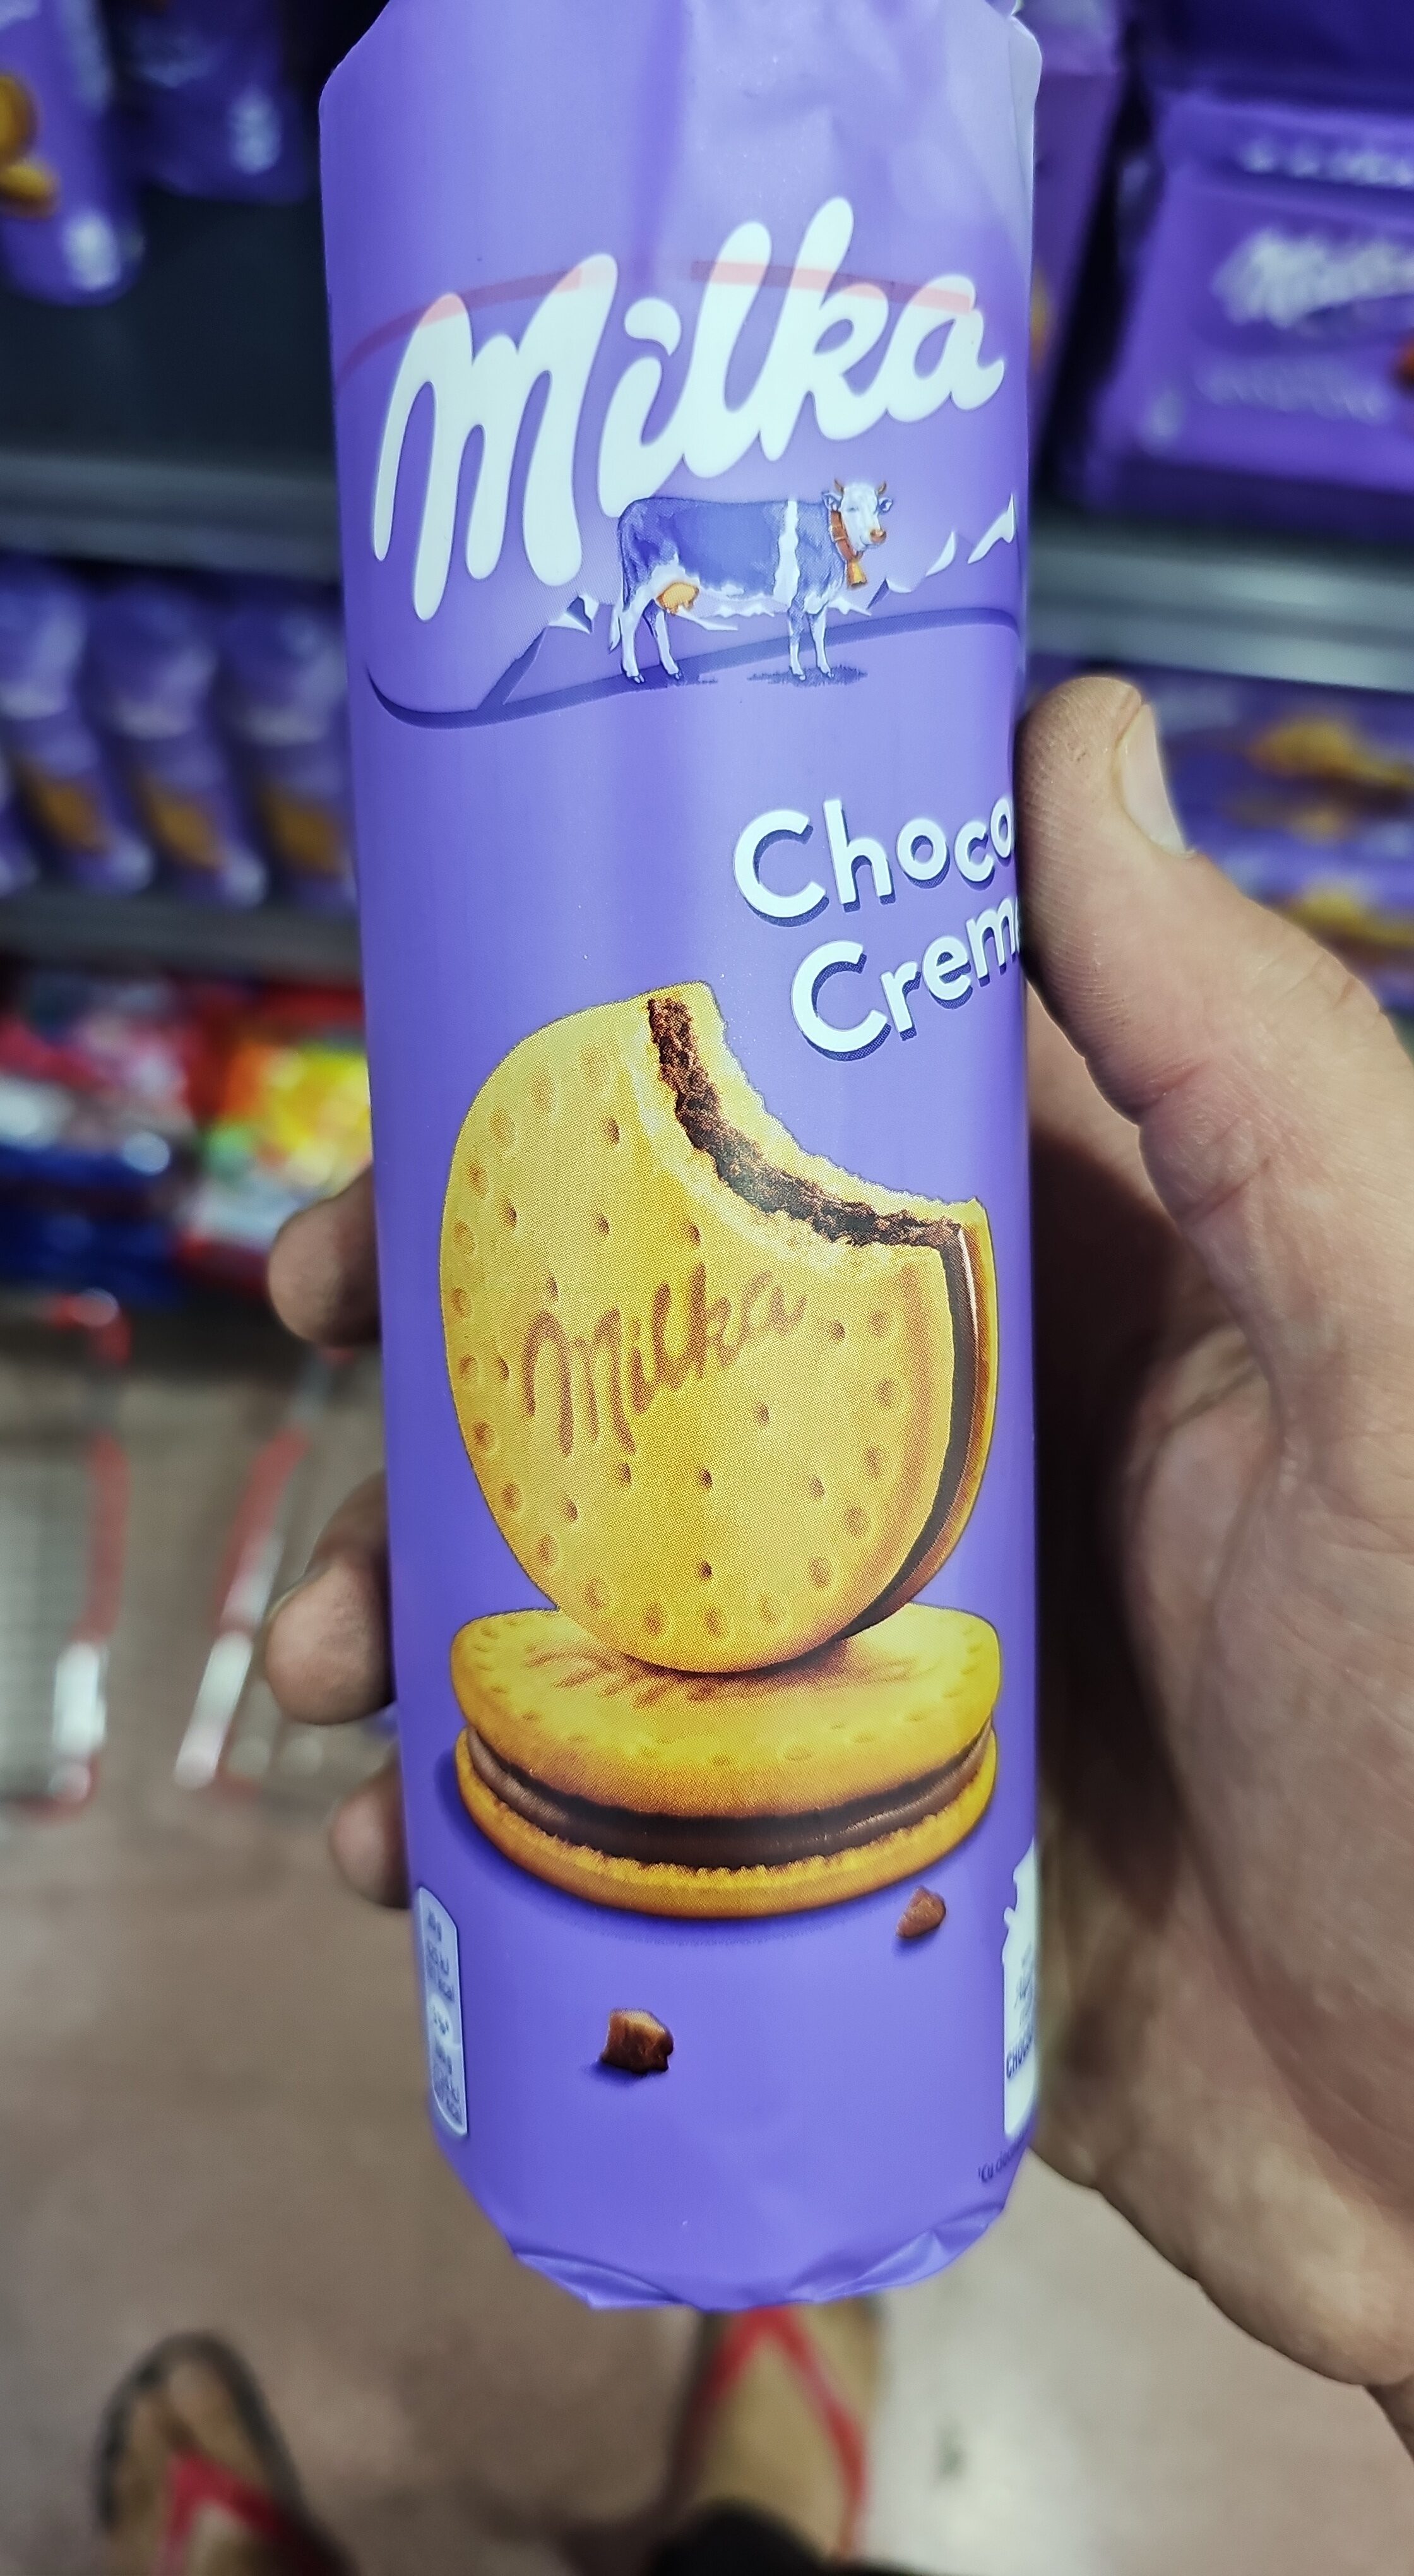 Biscuits with chocolate cream - Product